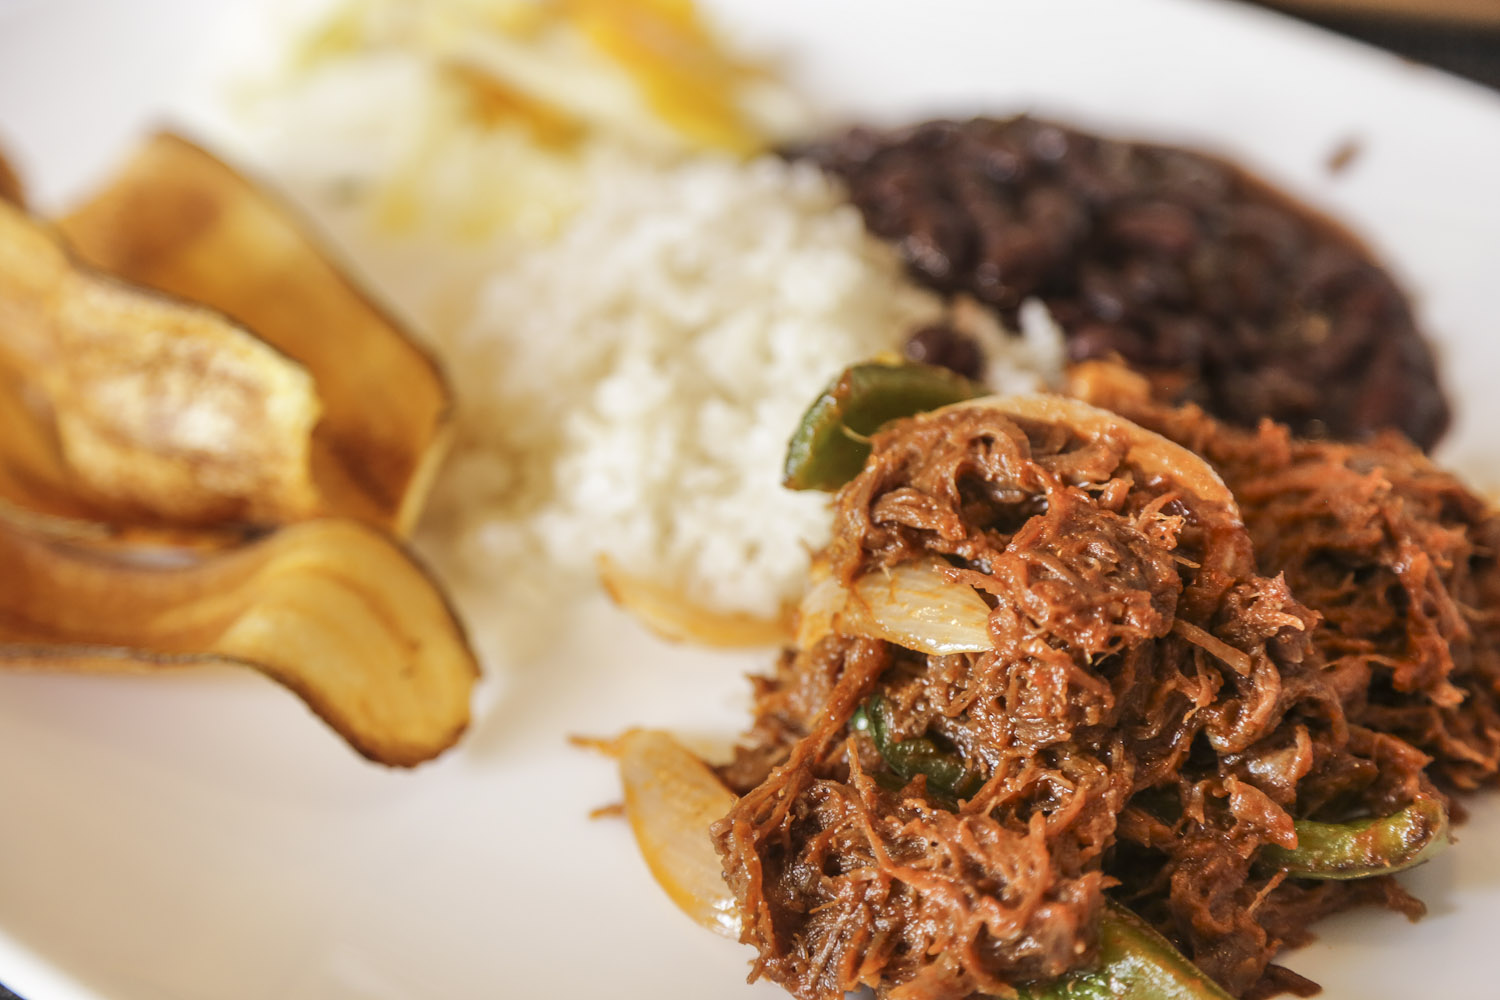 Ropa Viella is one of the most common dishes in Cuba